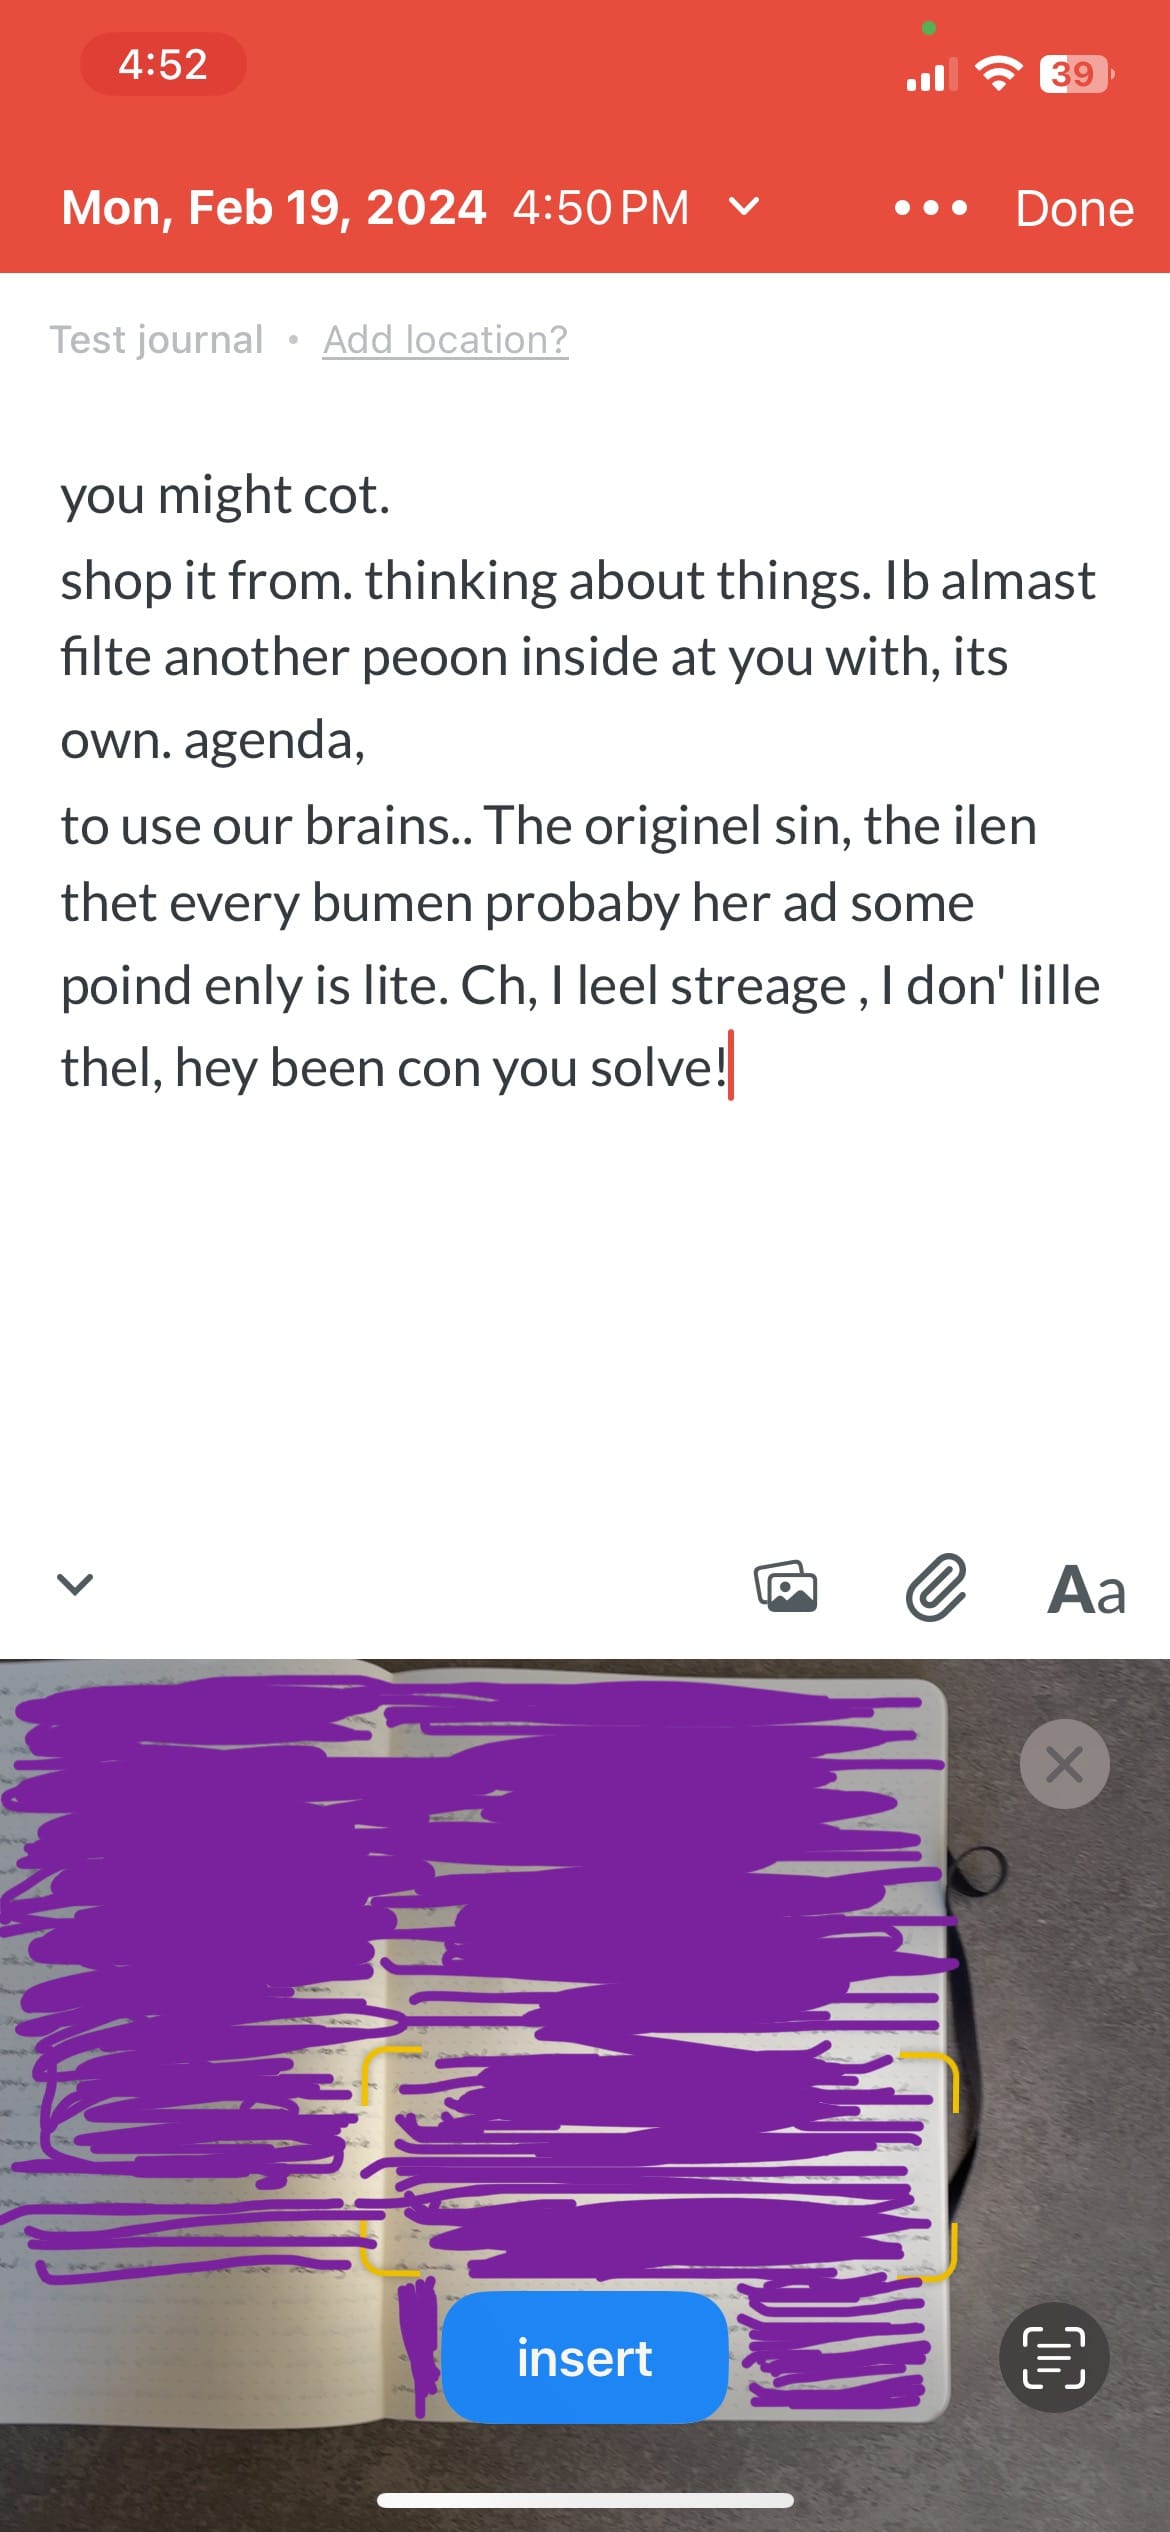 Blurred out because I don’t want to subject anyone to the actual contents of my journal. You can see the yellow automatic selection from Day One isn’t the entire page of text. No matter what I did, I could not get the app to select the full page. 